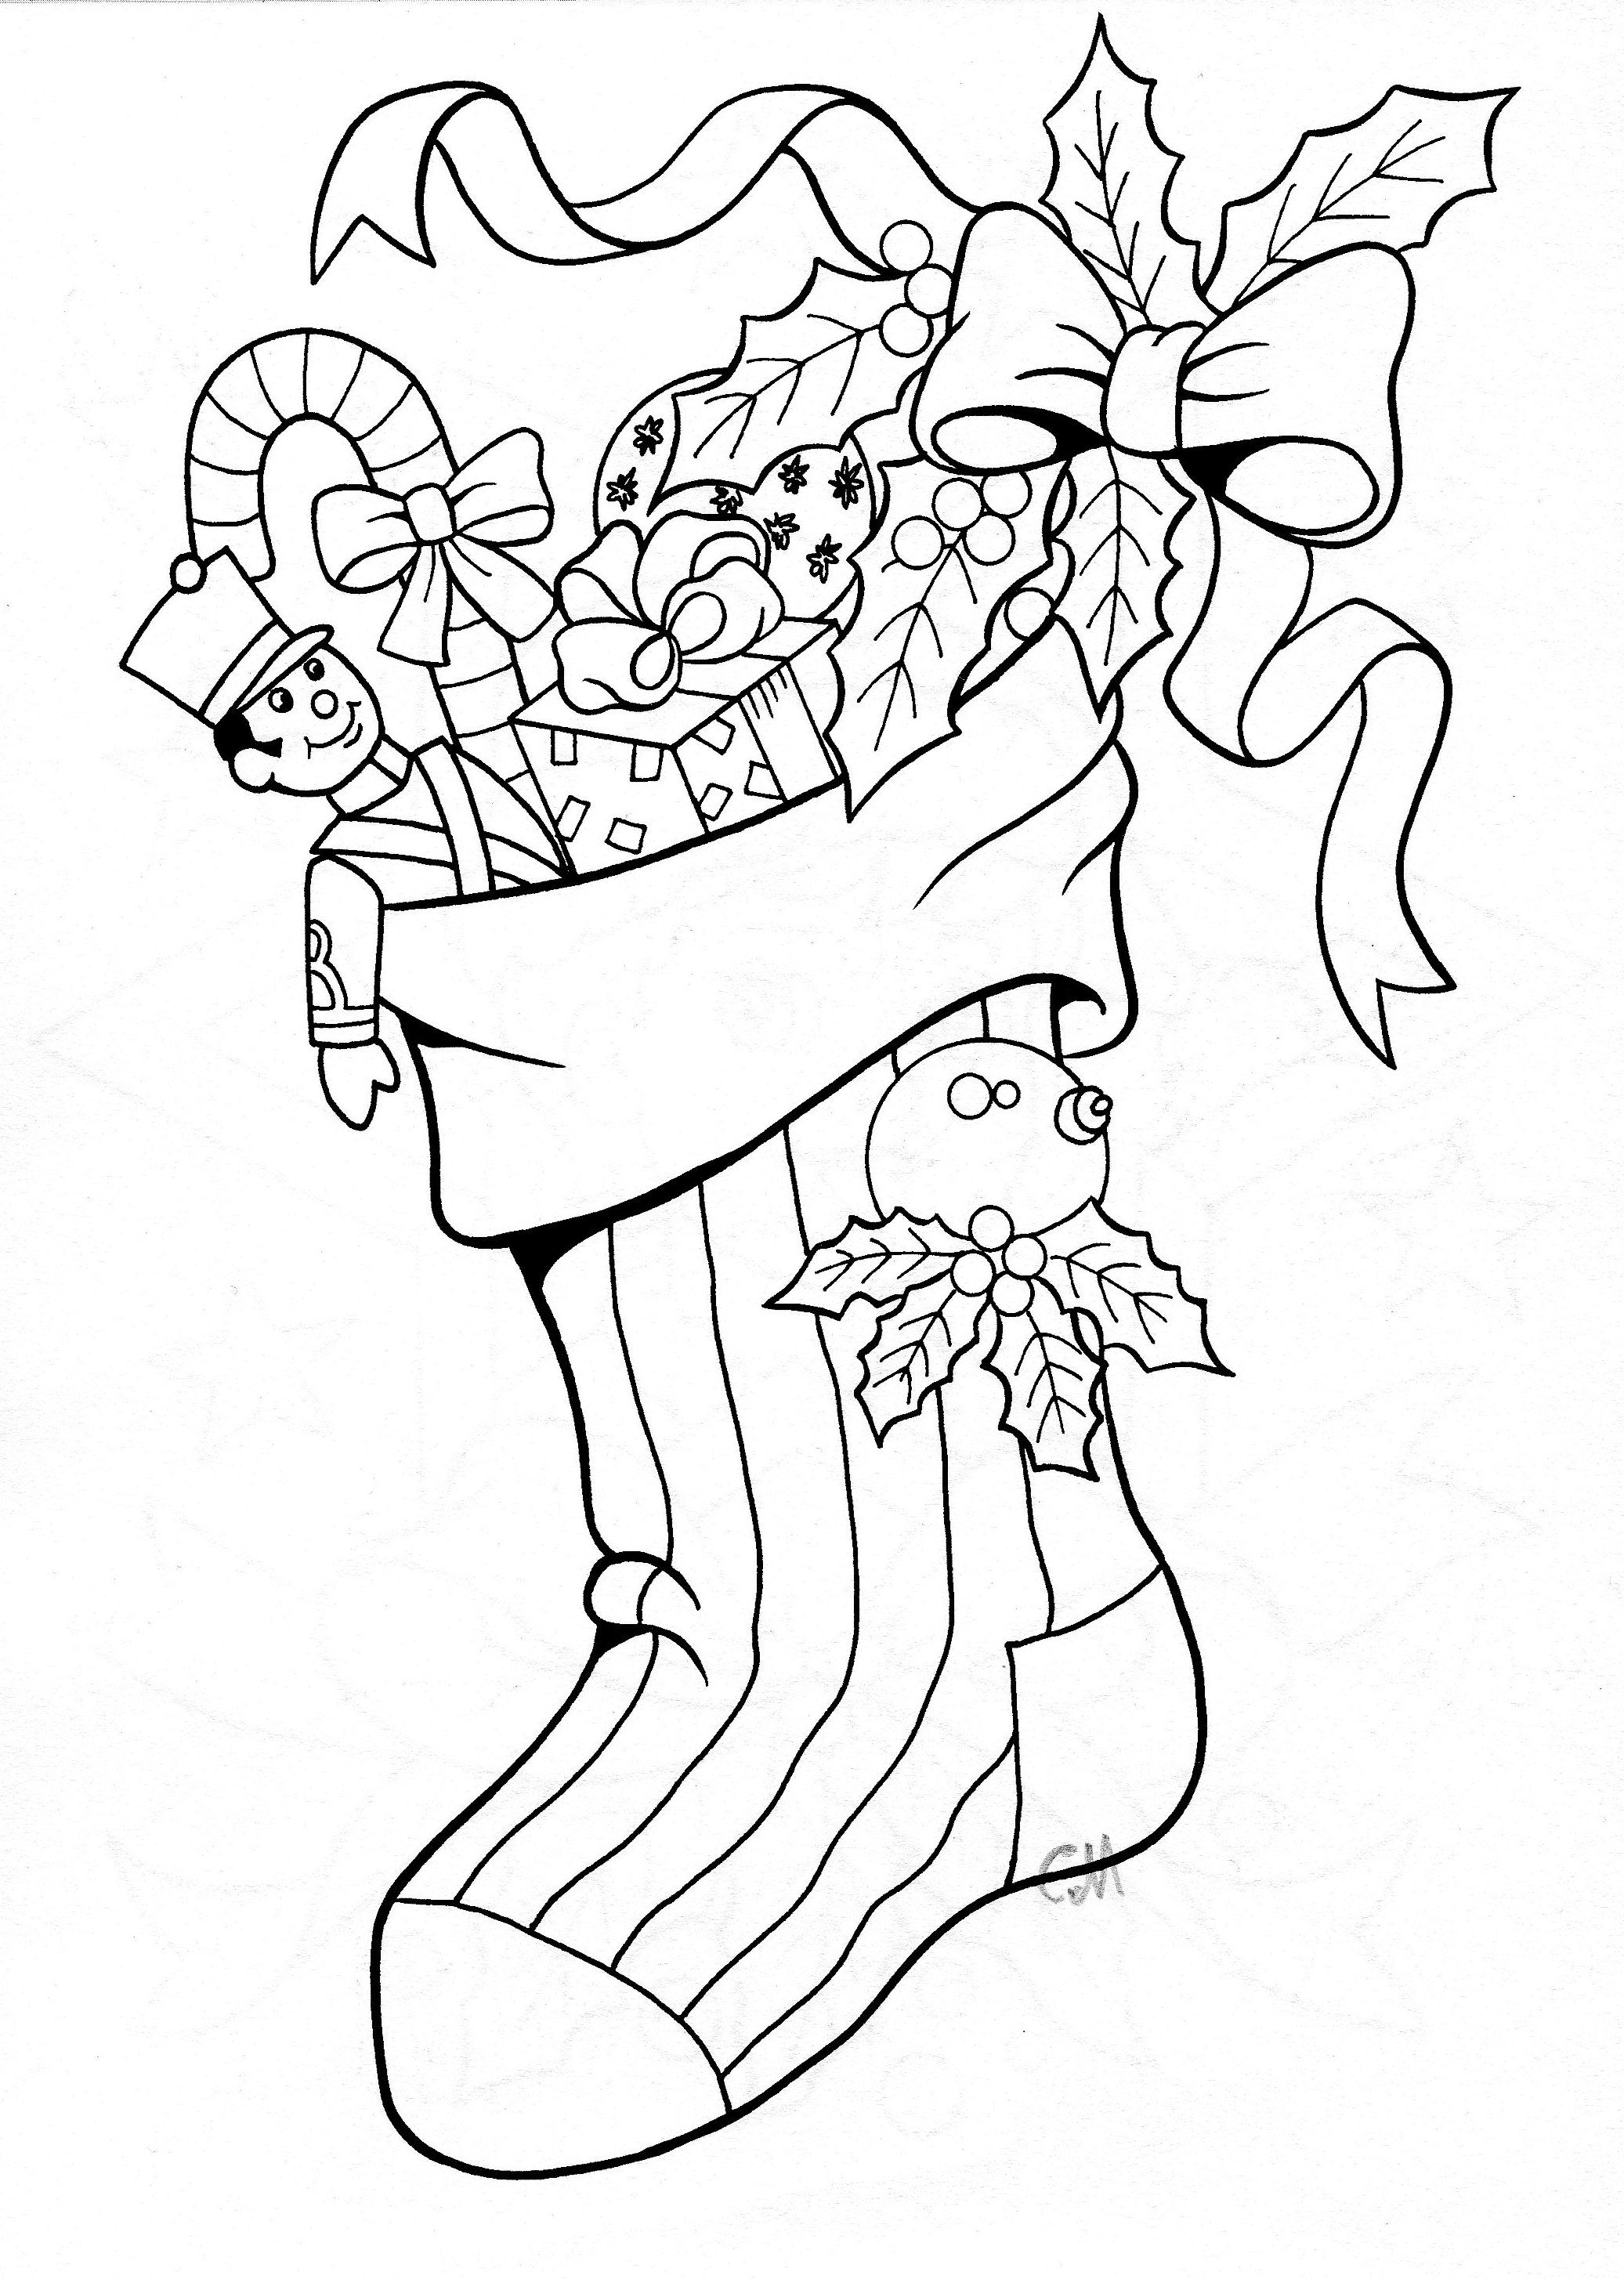 Stocking Coloring Worksheet | Printable Worksheets and Activities for  Teachers, Parents, Tutors and Homeschool Families